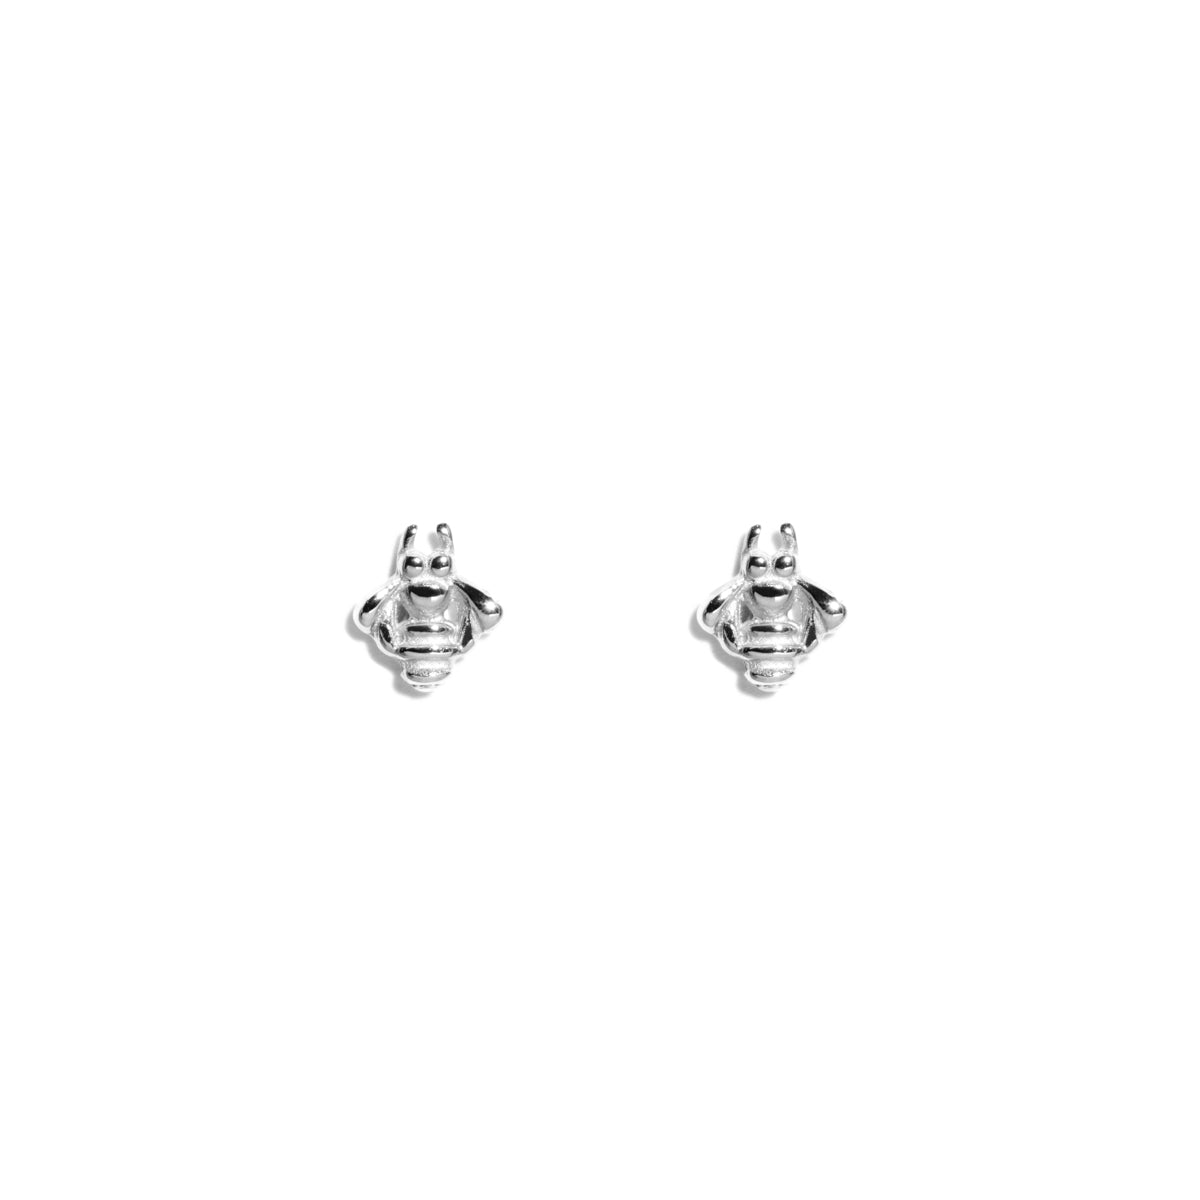 The Silver Tiny Bumble Bee Stud Earrings